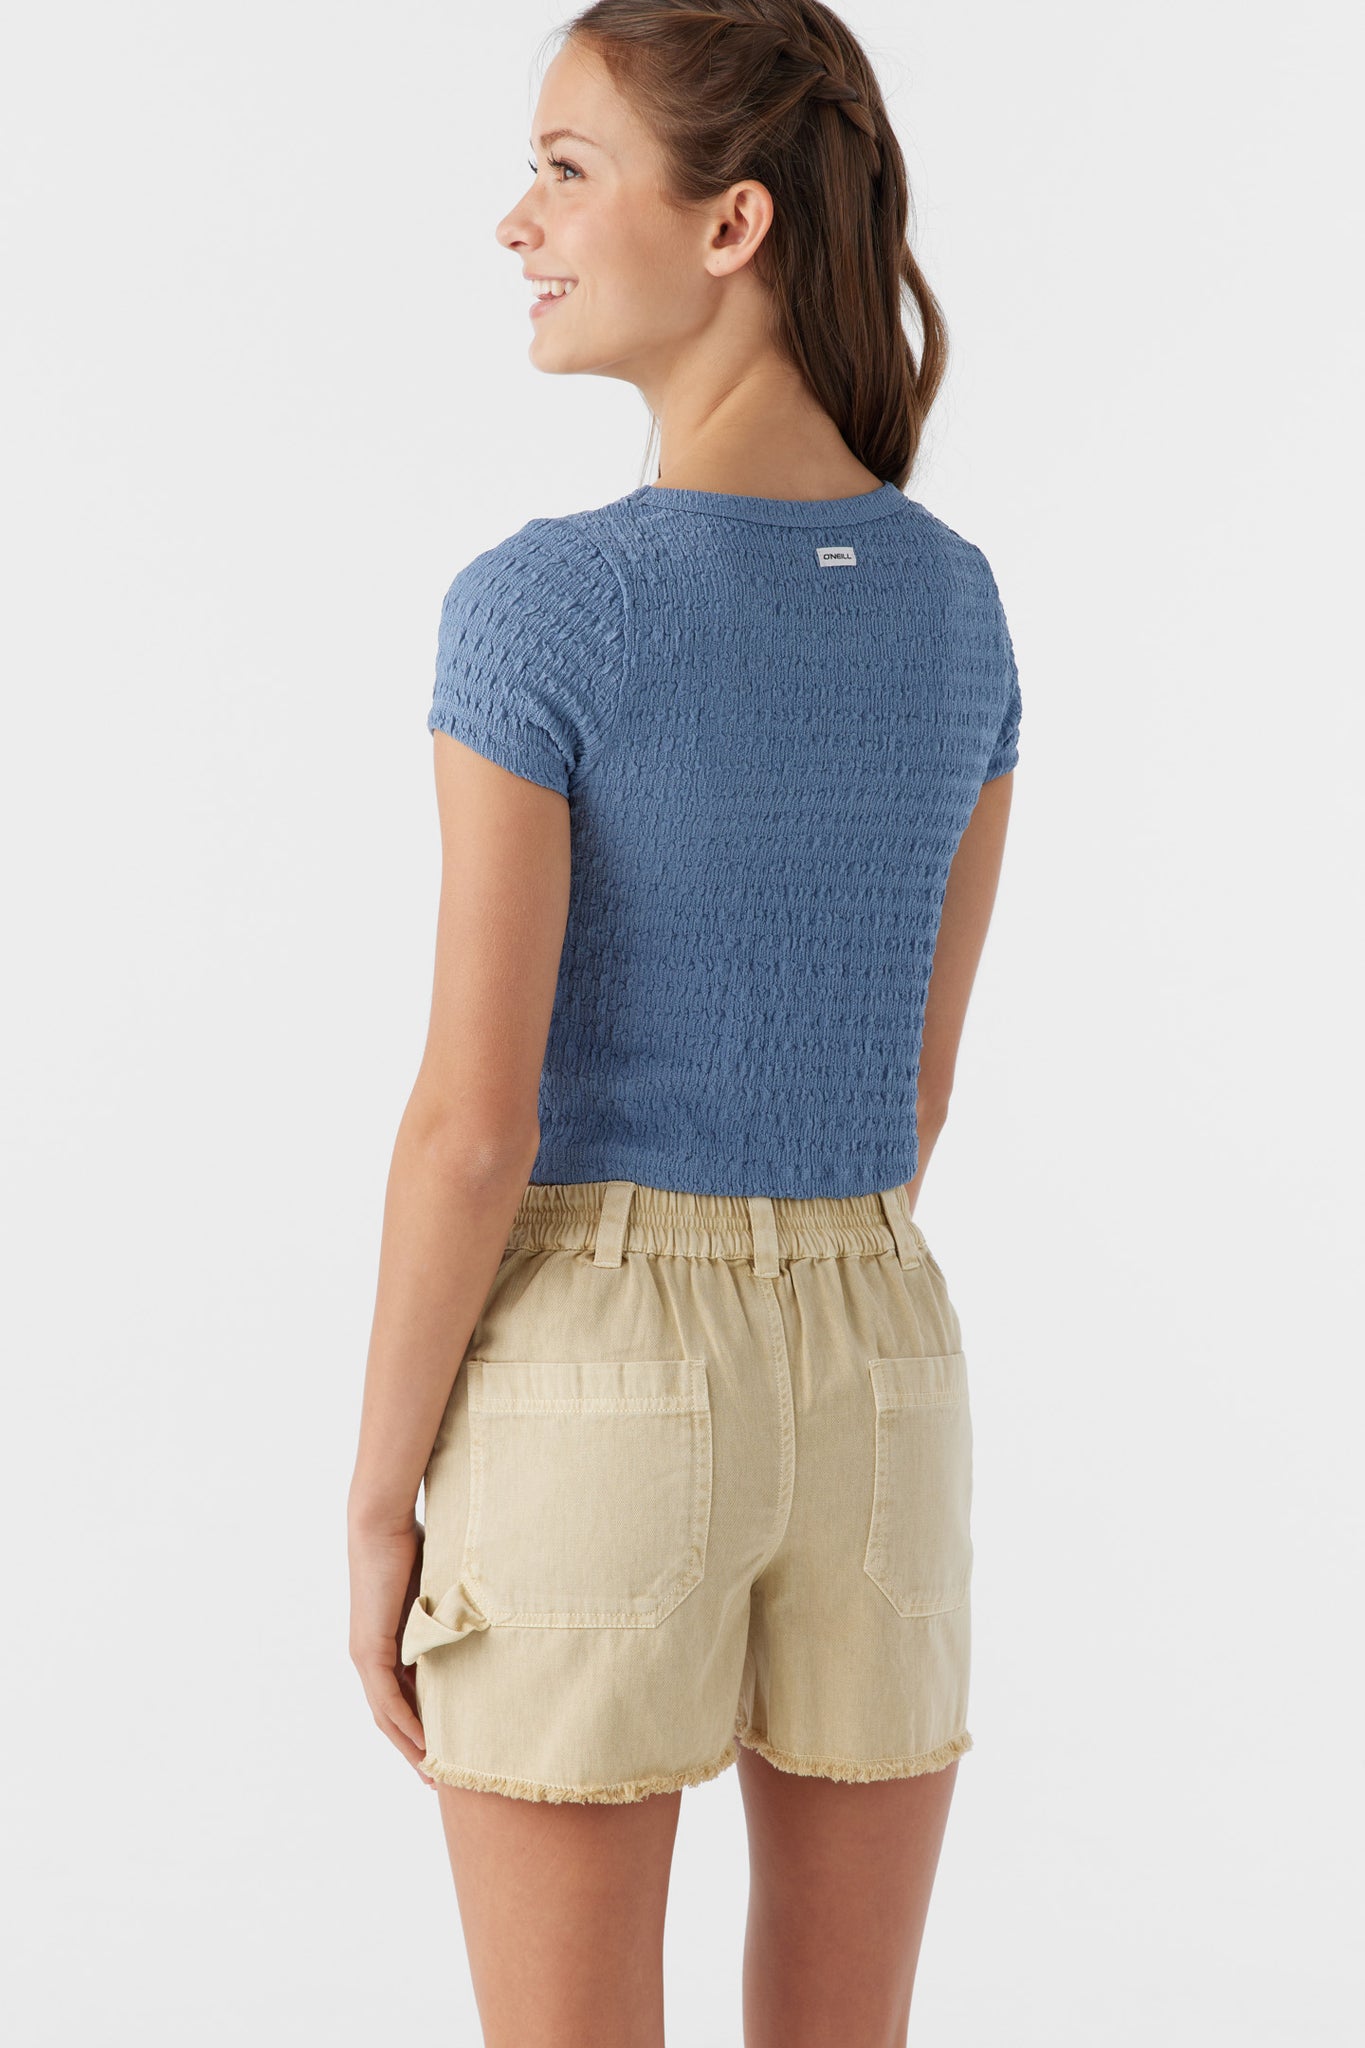 GIRL'S SHELLIE TEXTURED KNIT TOP